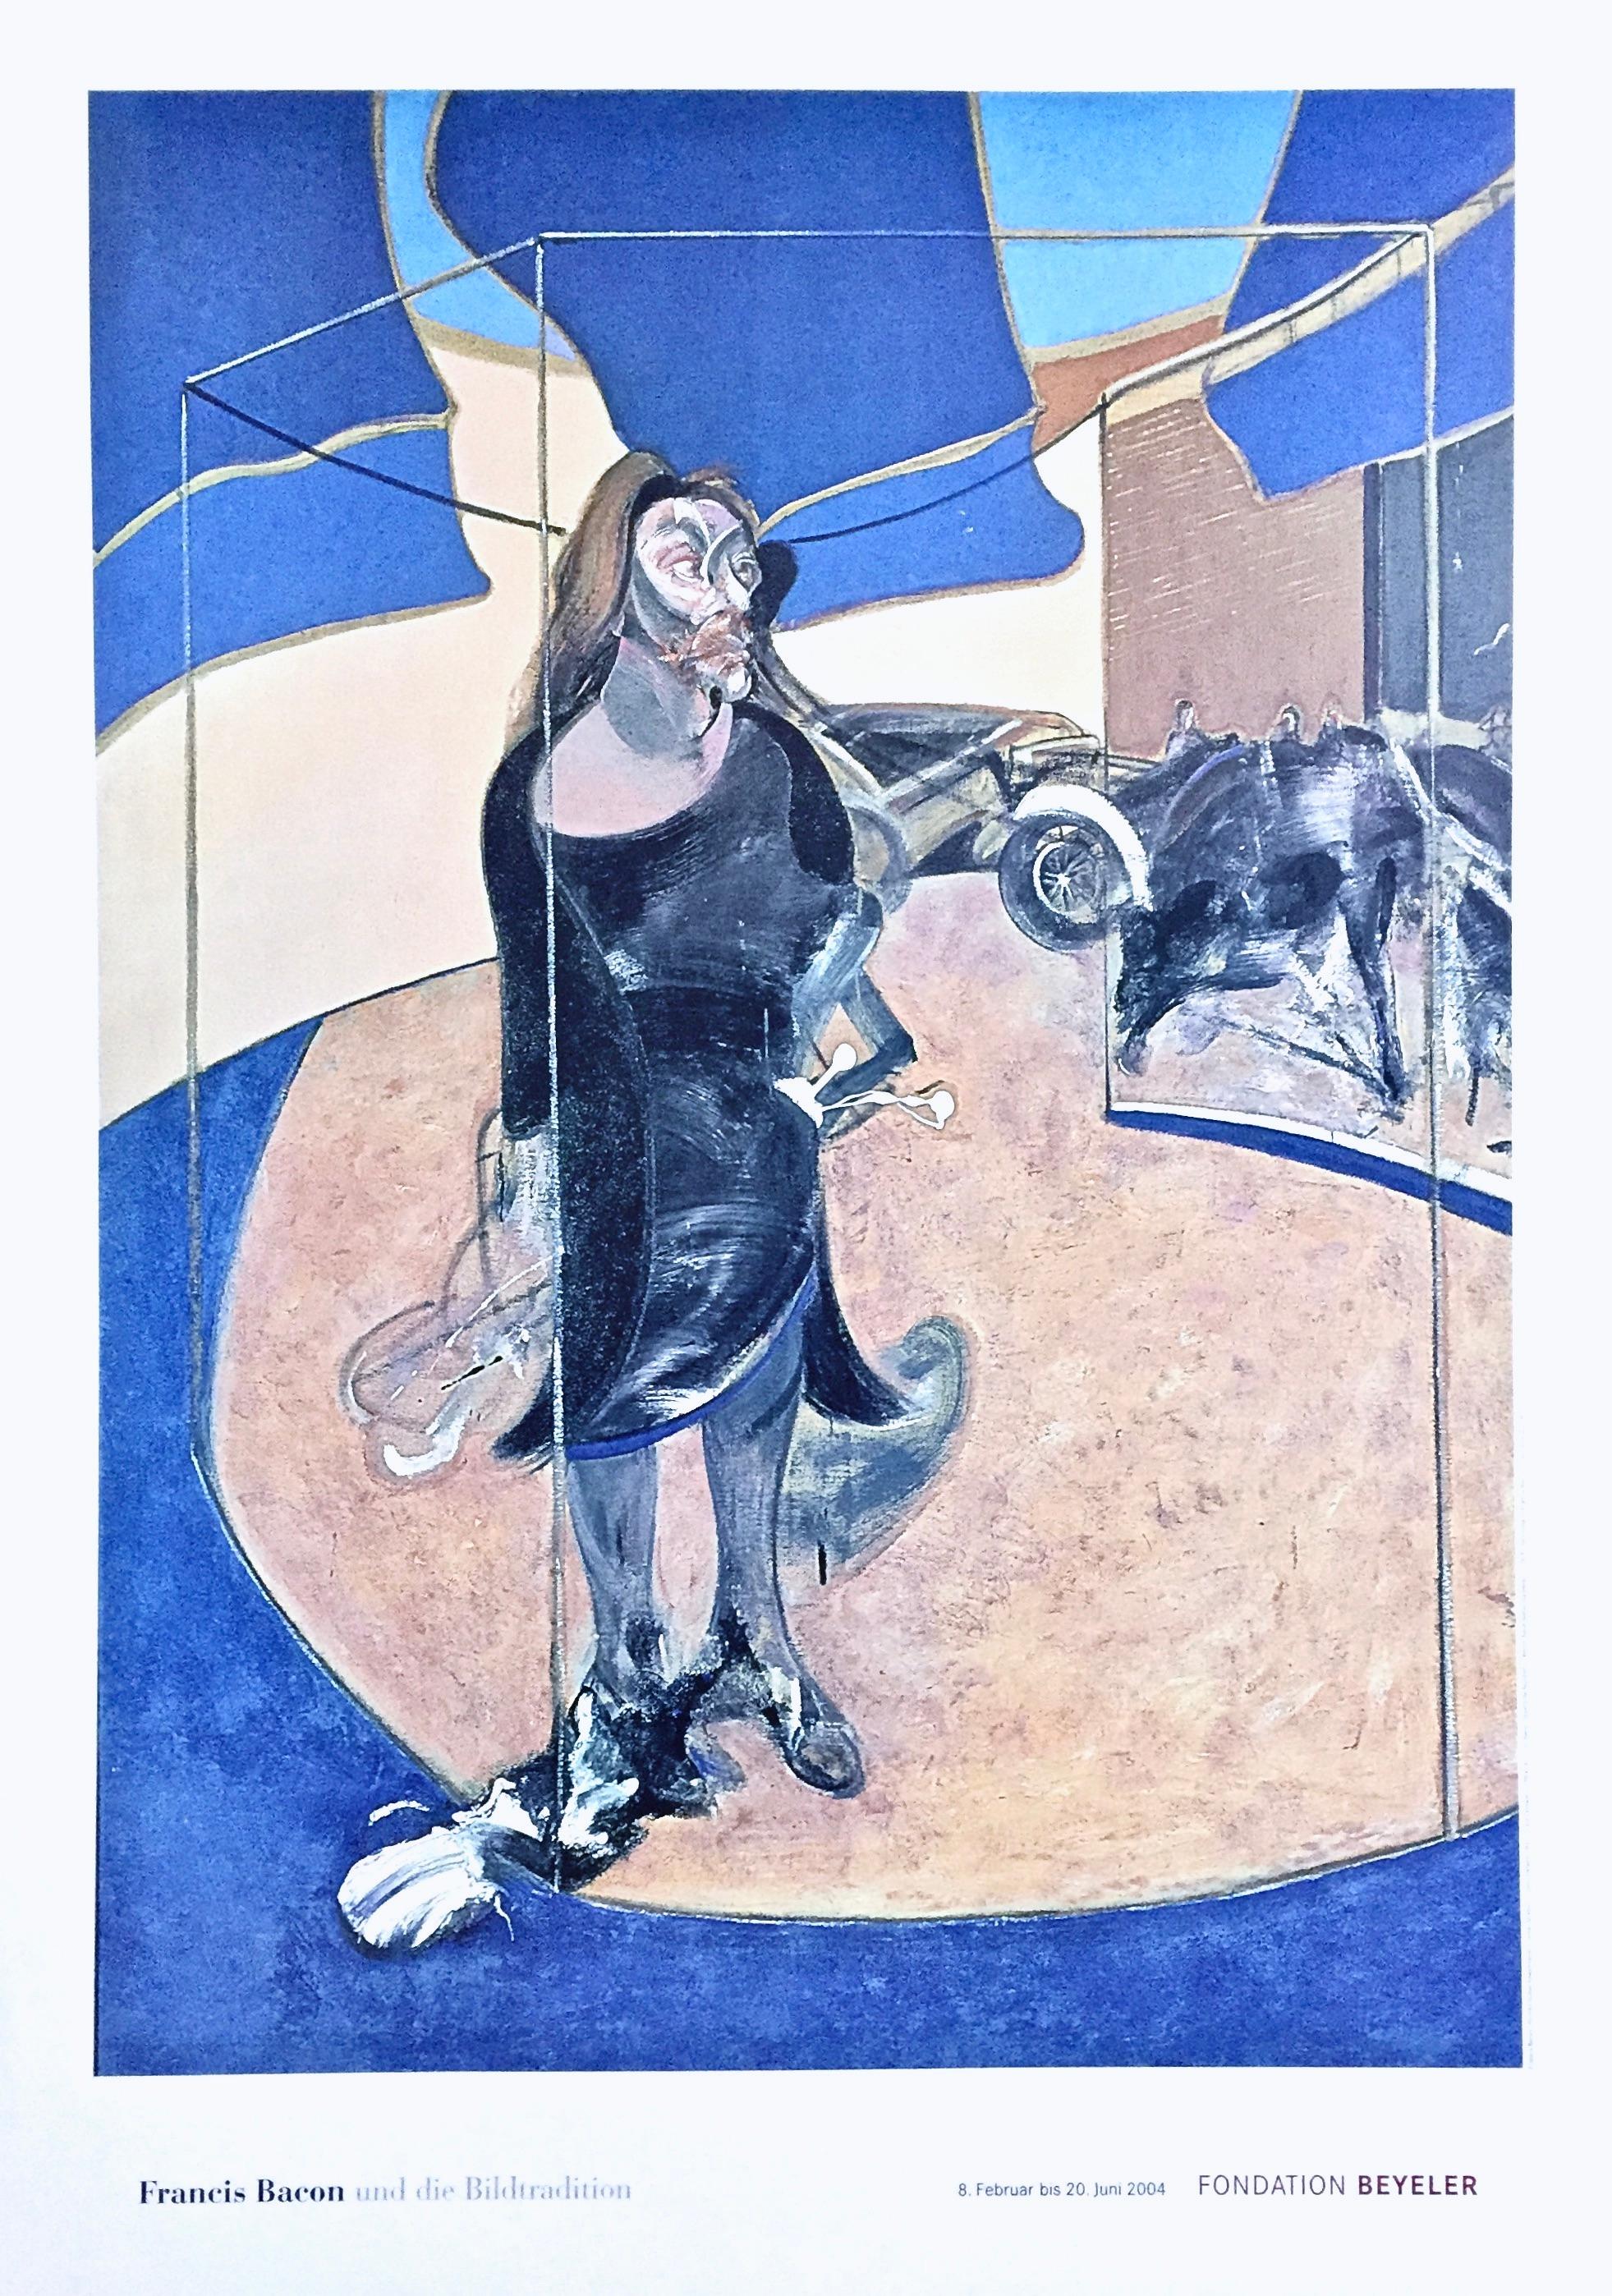 Francis Bacon Figurative Print - Bacon, Portrait Isabel Rawsthorne, 2003 (after)